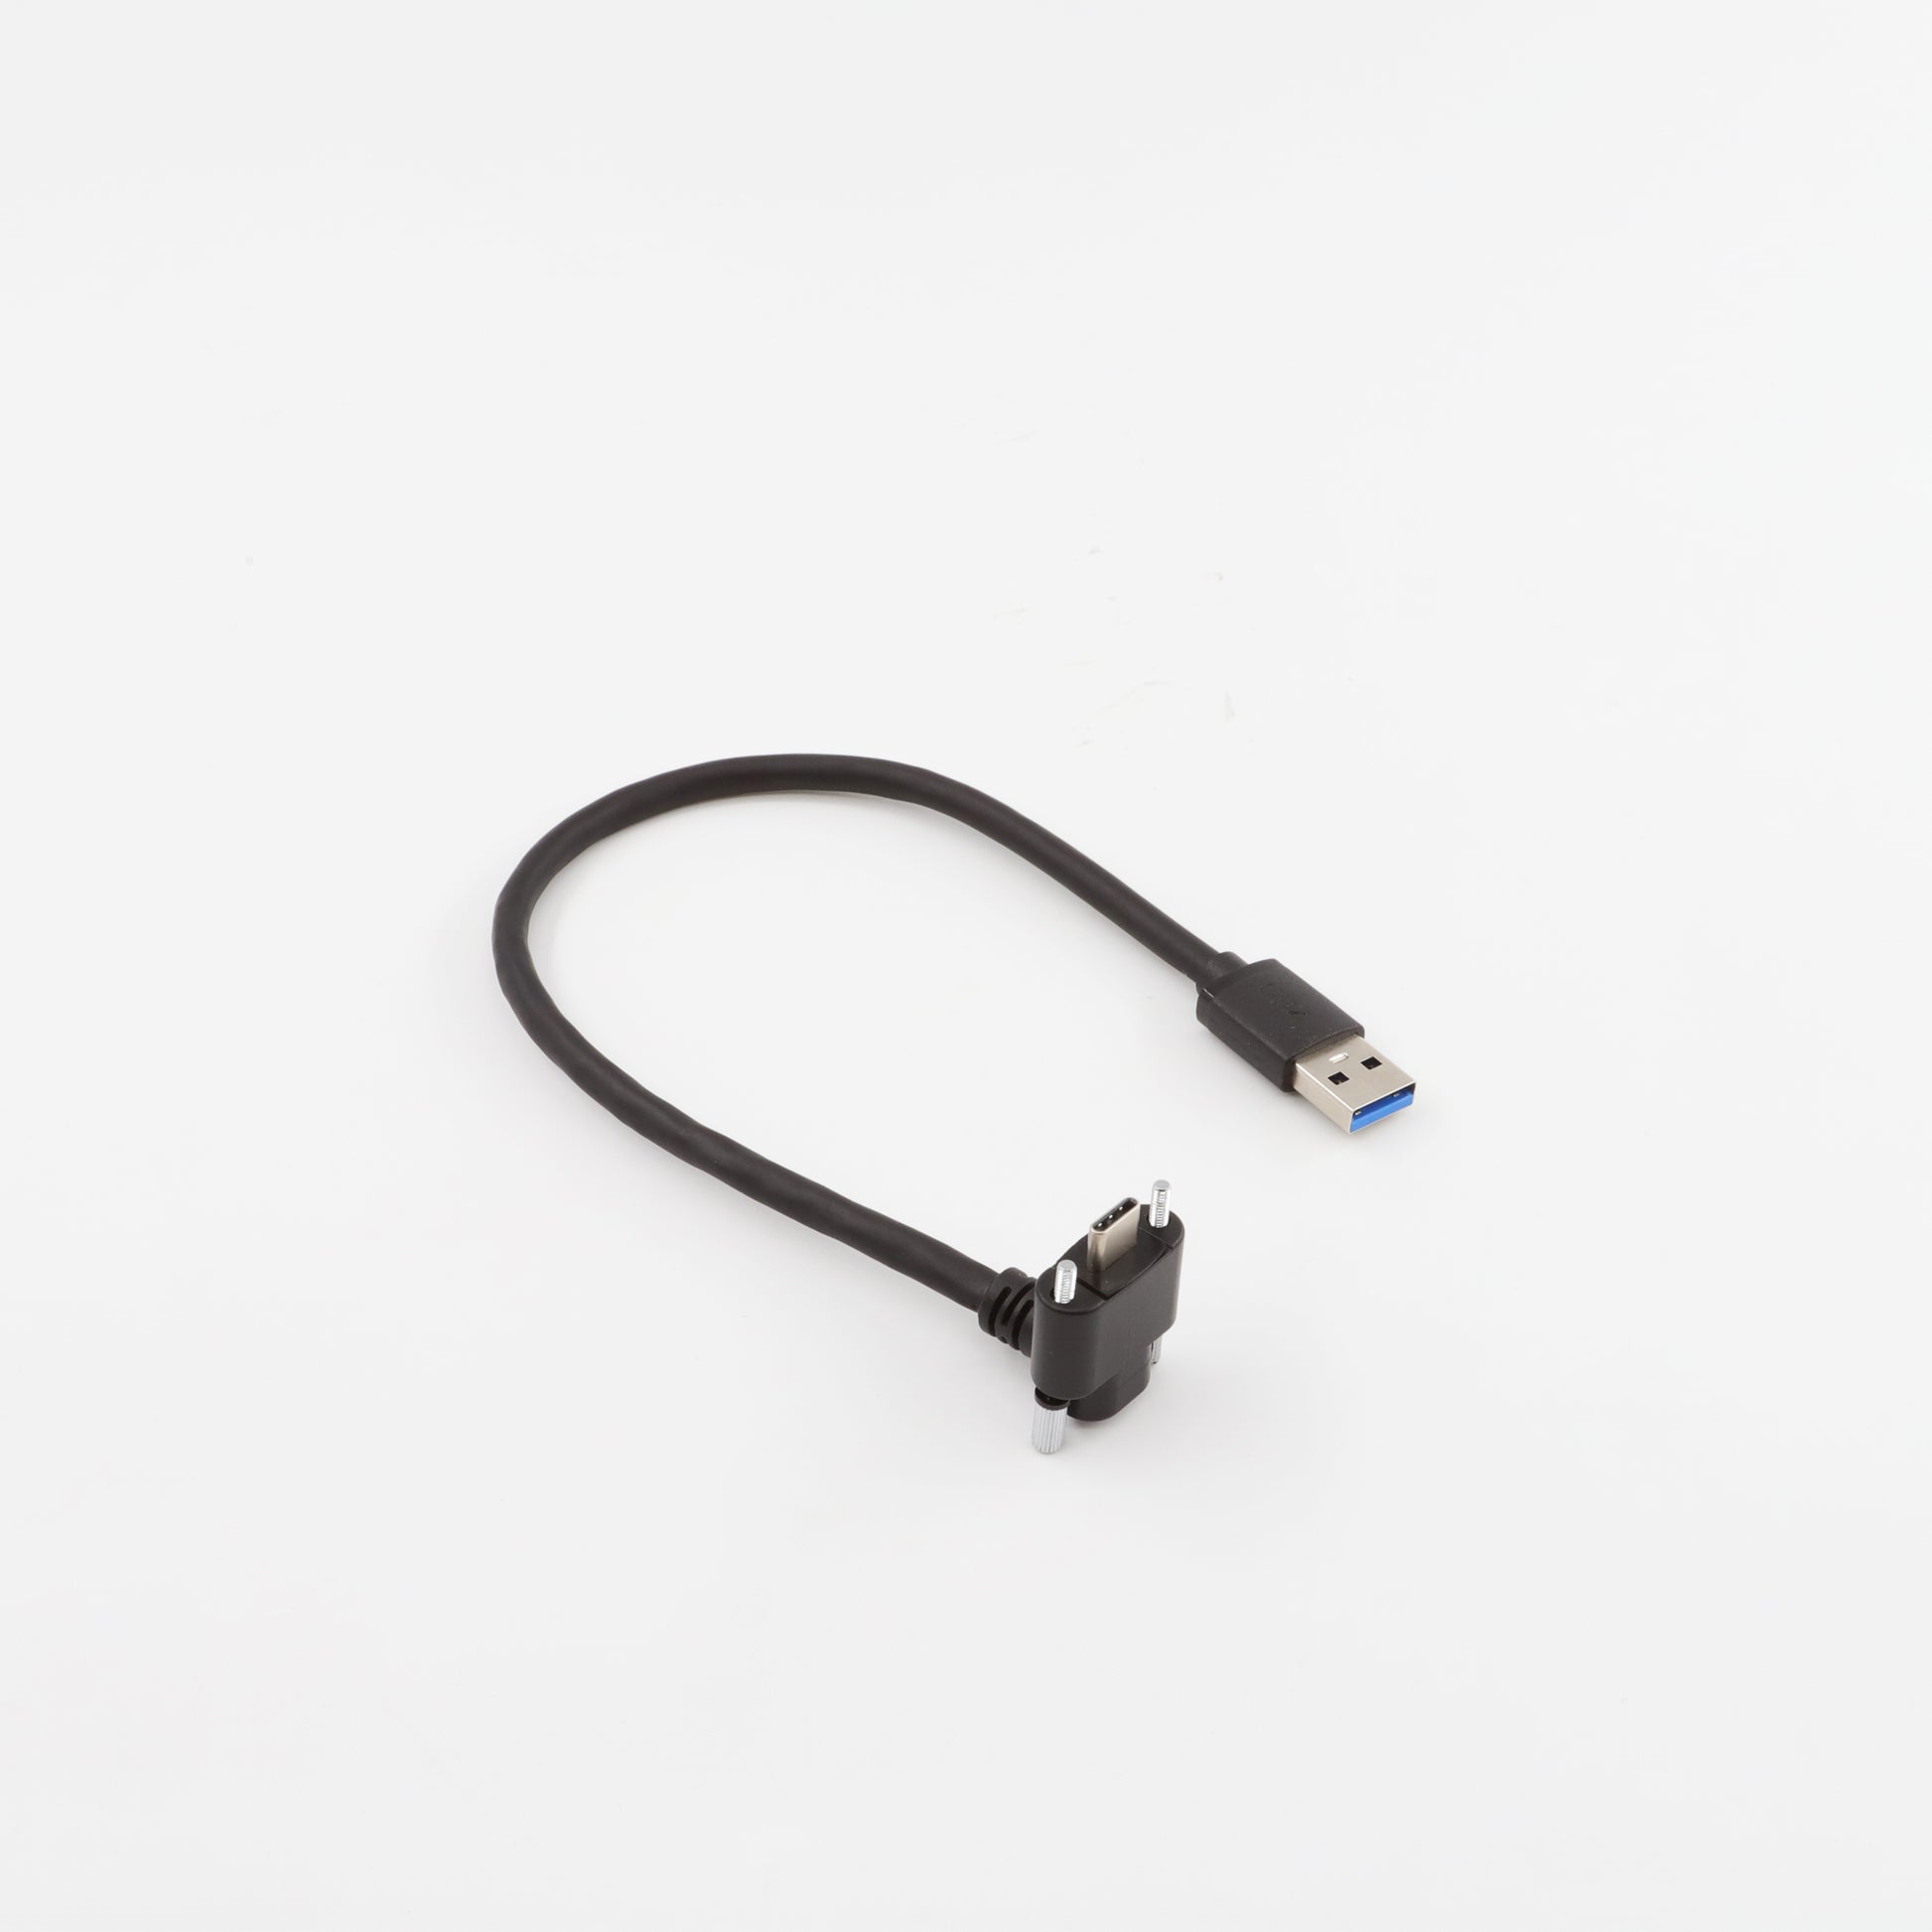 Right-angle USB 3.0 Type-C Dual Screw Locking Cable for ZED 2i camera